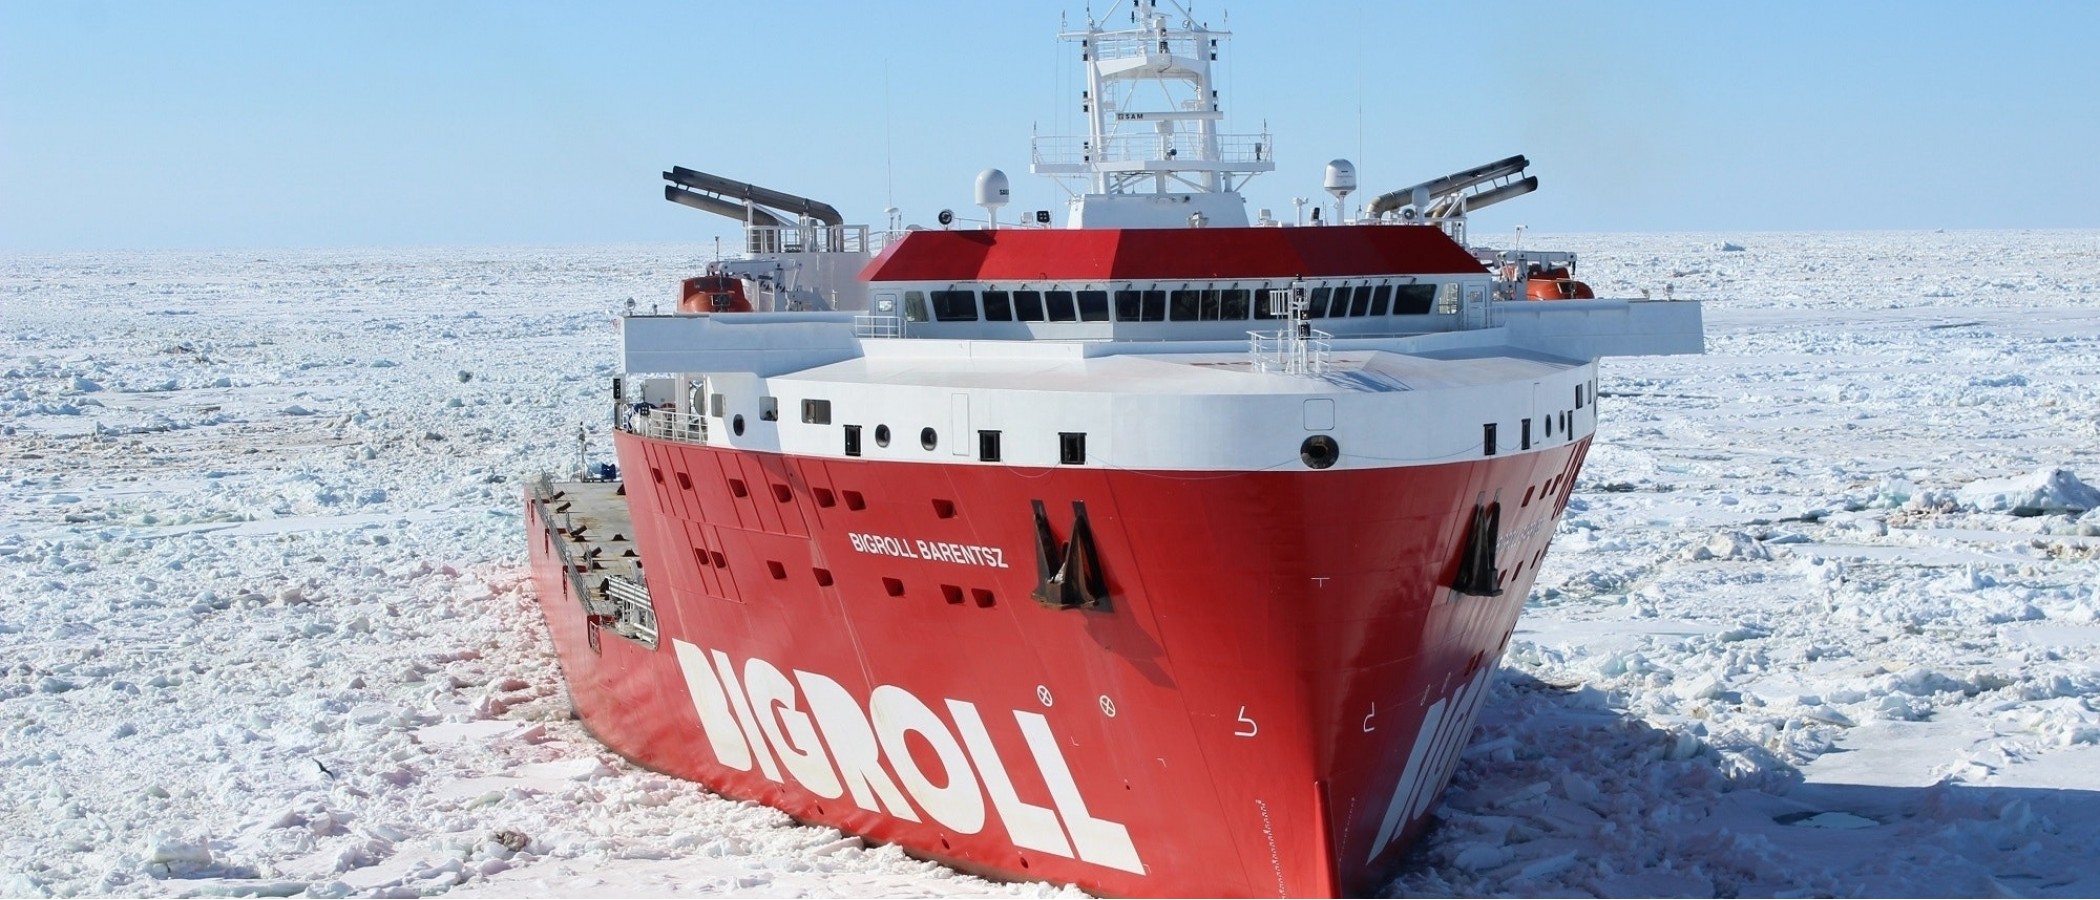 De-icing systems on ships and offshore platforms